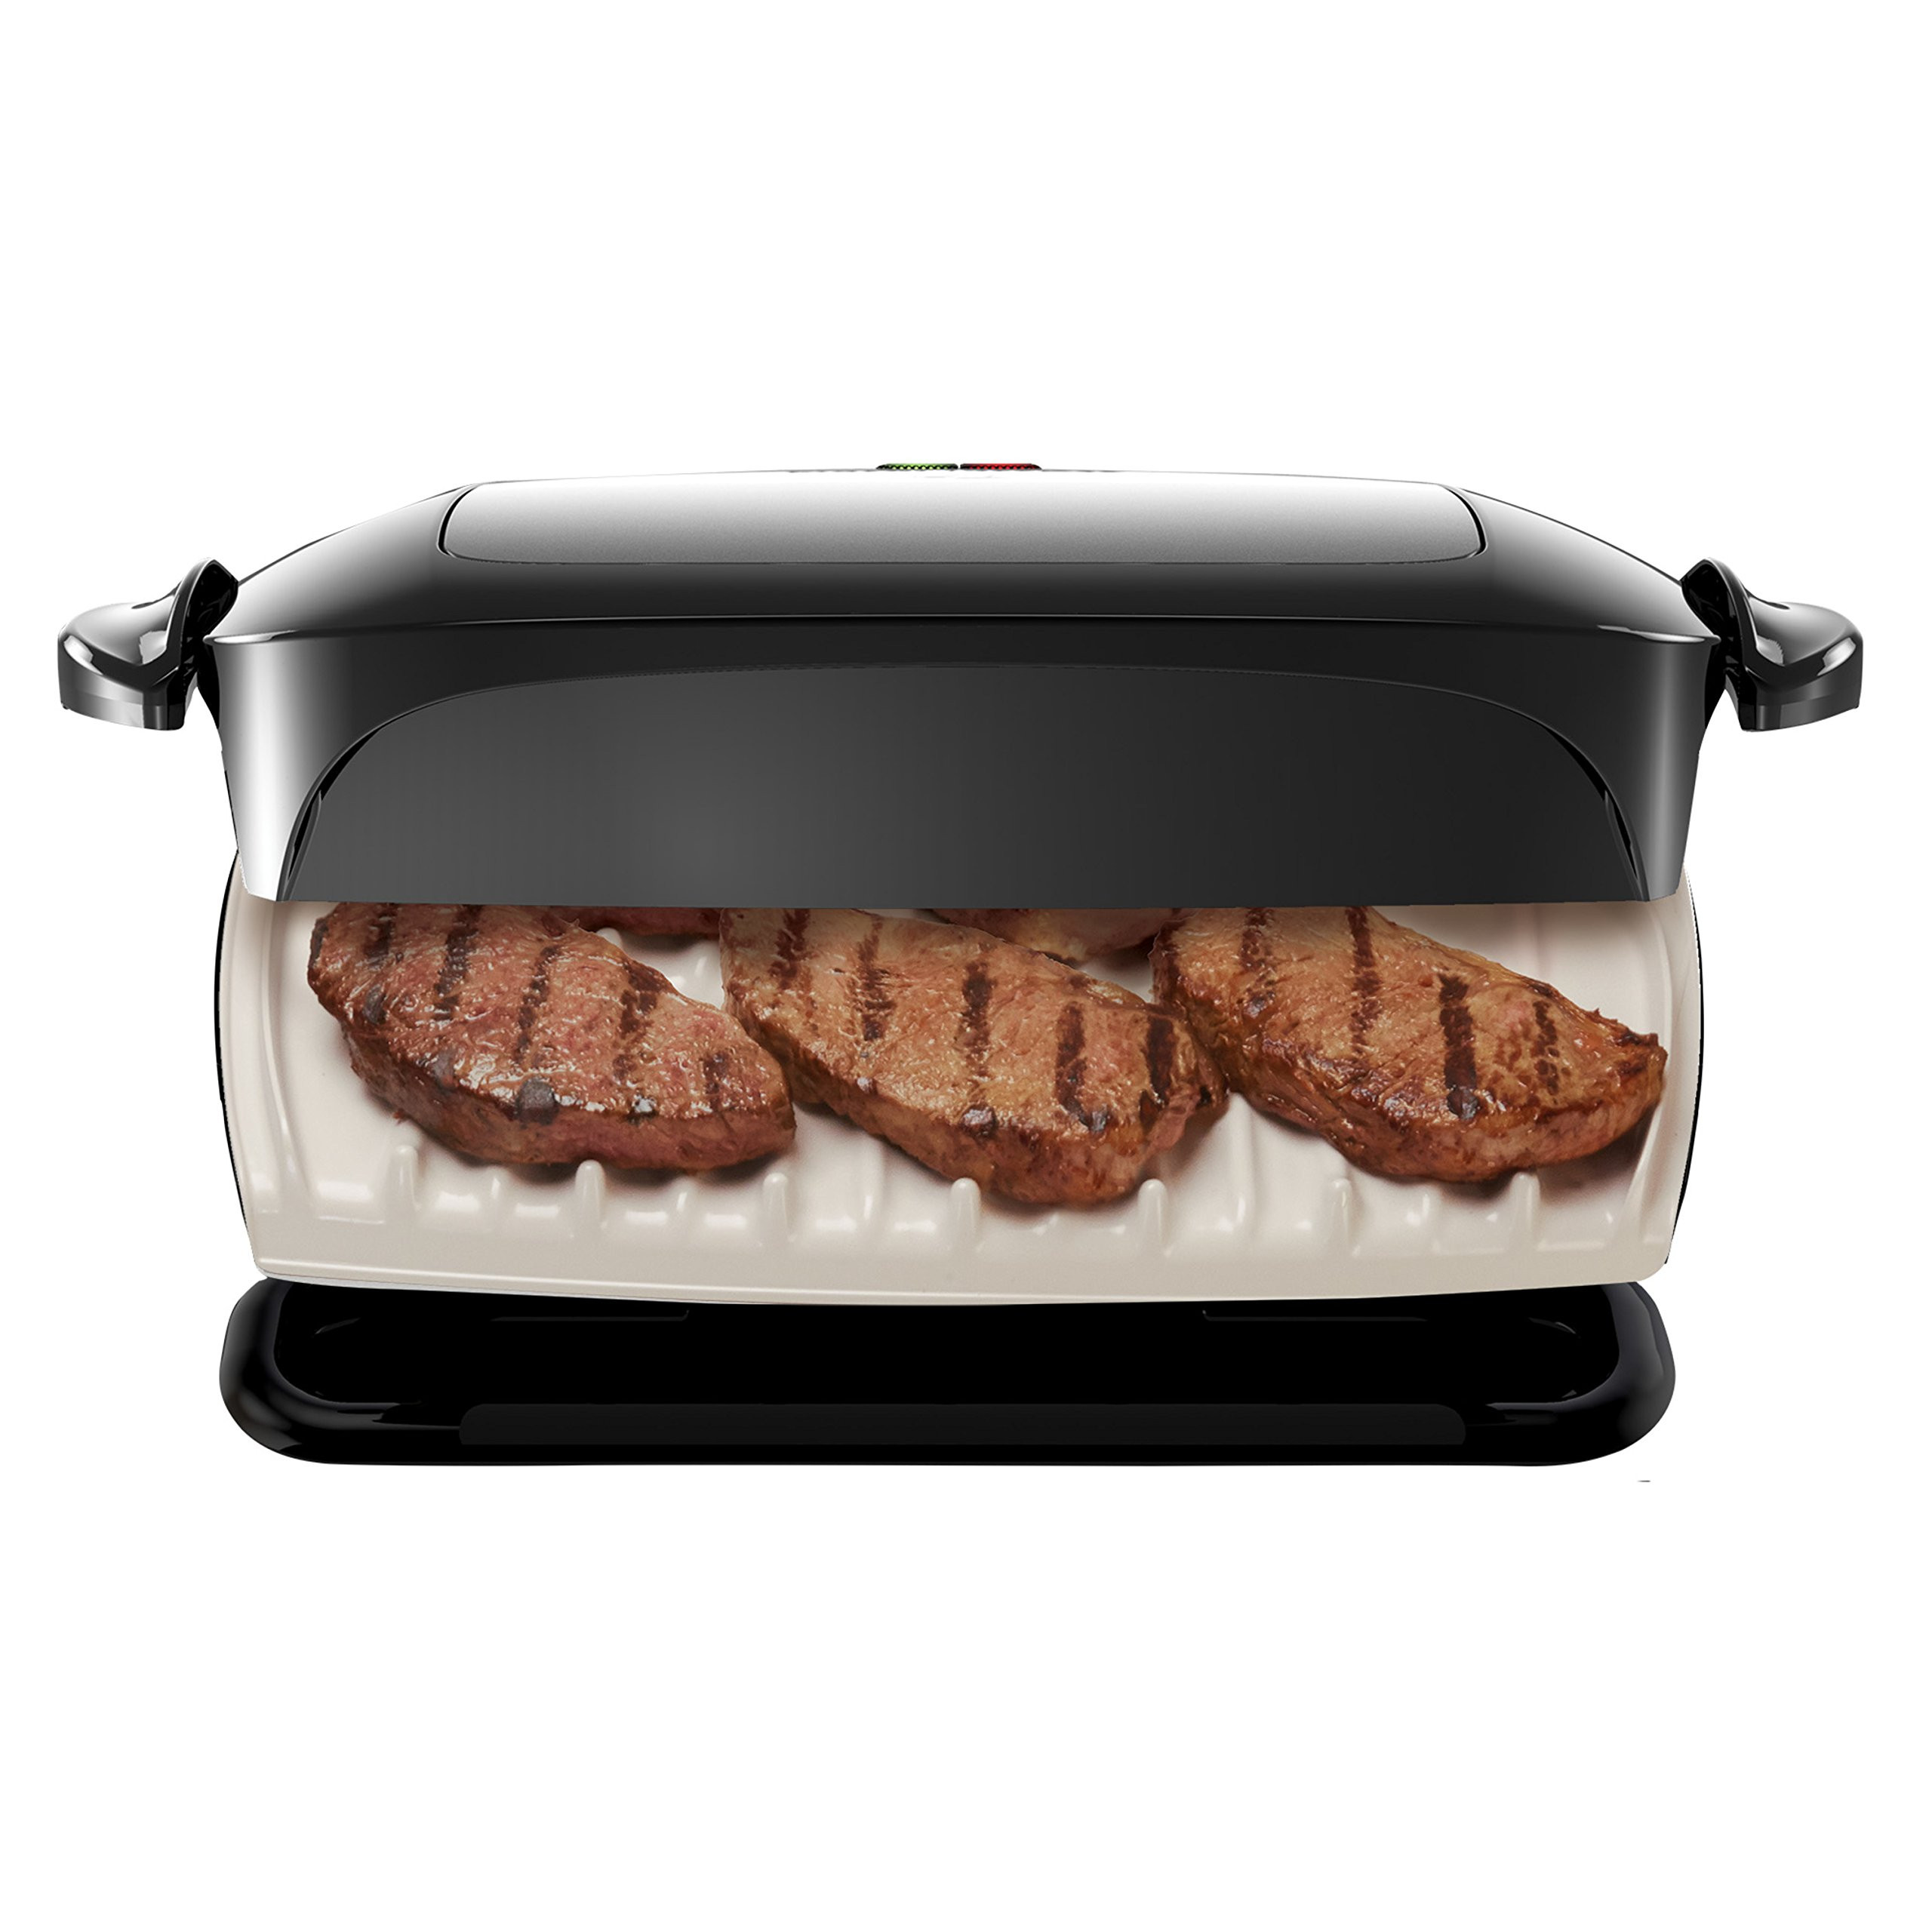 Best George foreman Grill Panini